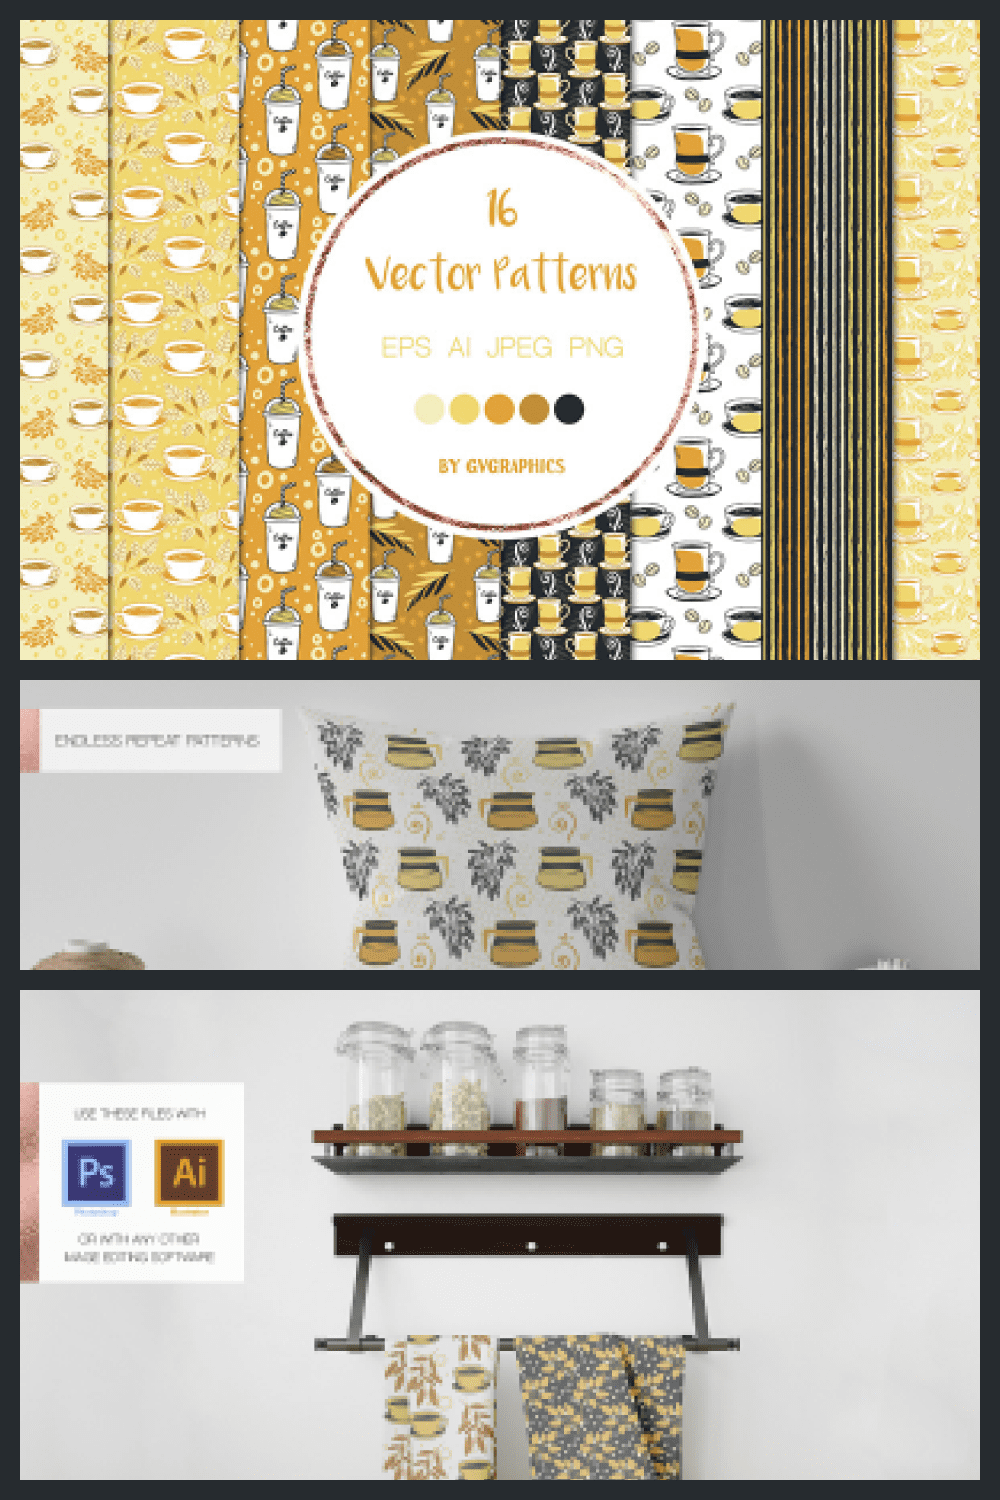 Time for Coffee Vector Patterns and Seamless Tiles - MasterBundles - Pinterest Collage Image.